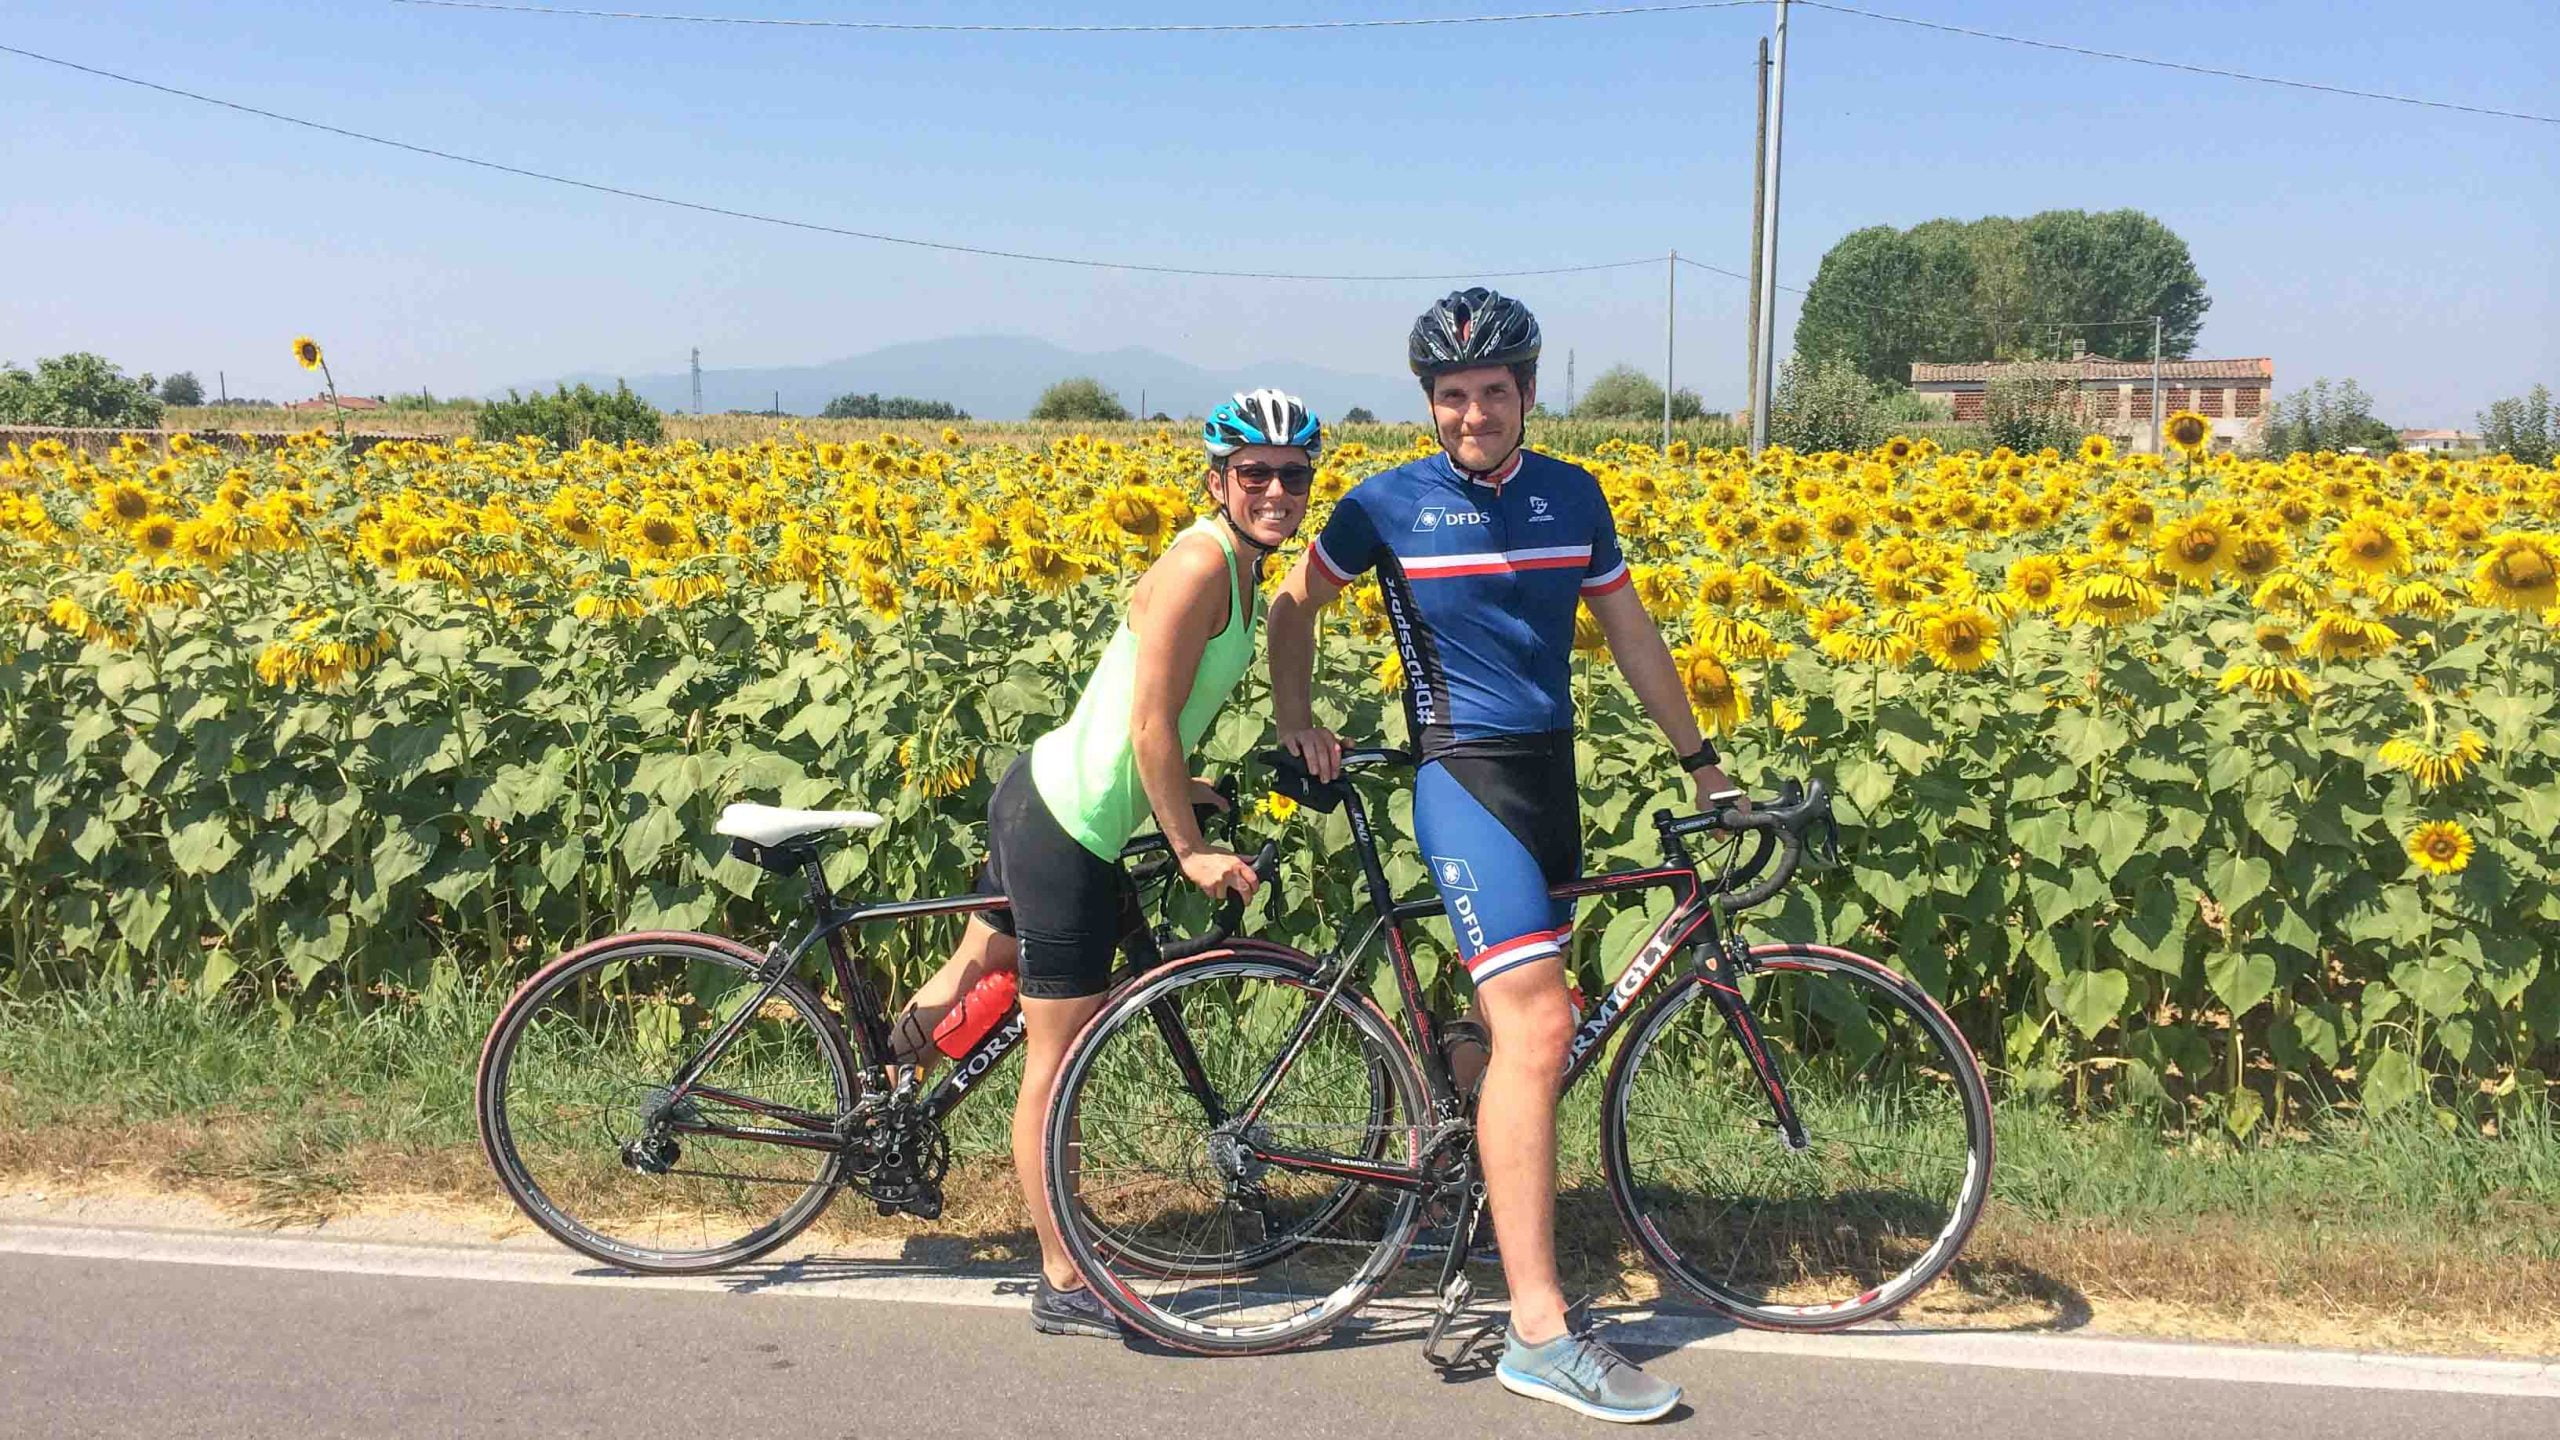 Cyclists in front of sunflowers